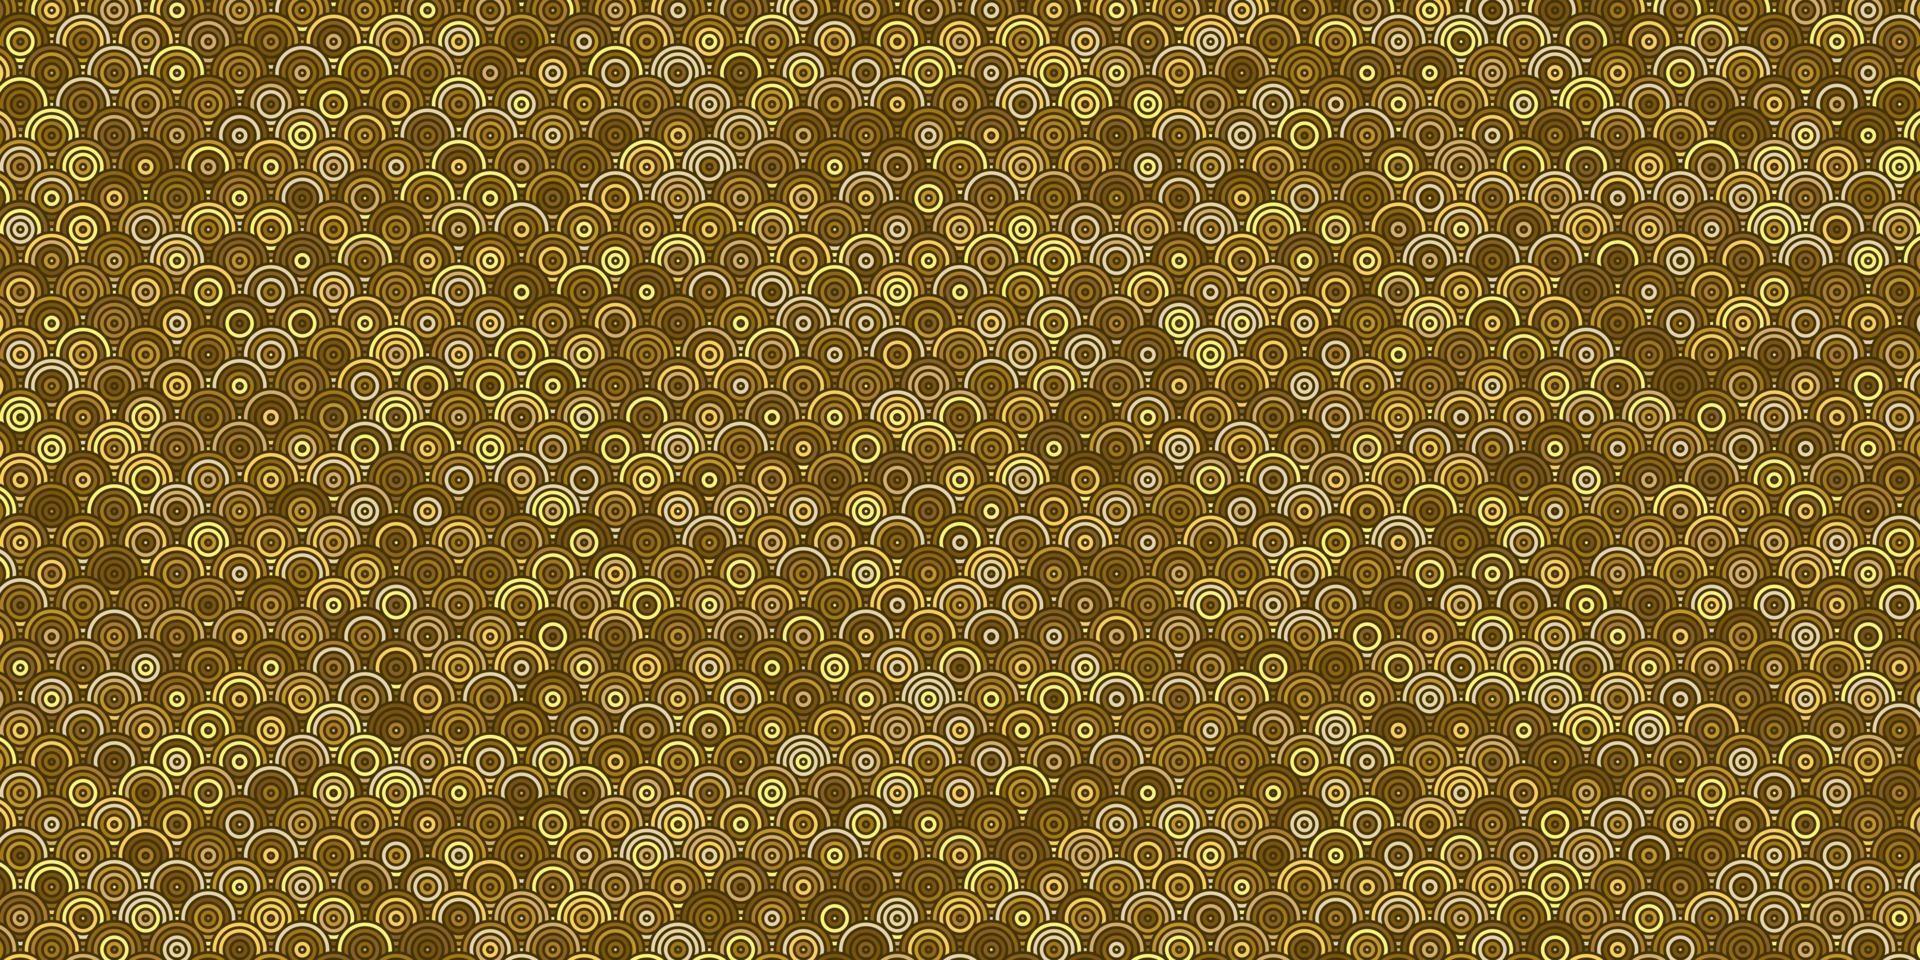 Abstract geometric pattern circles overlapping traditional gold background vector